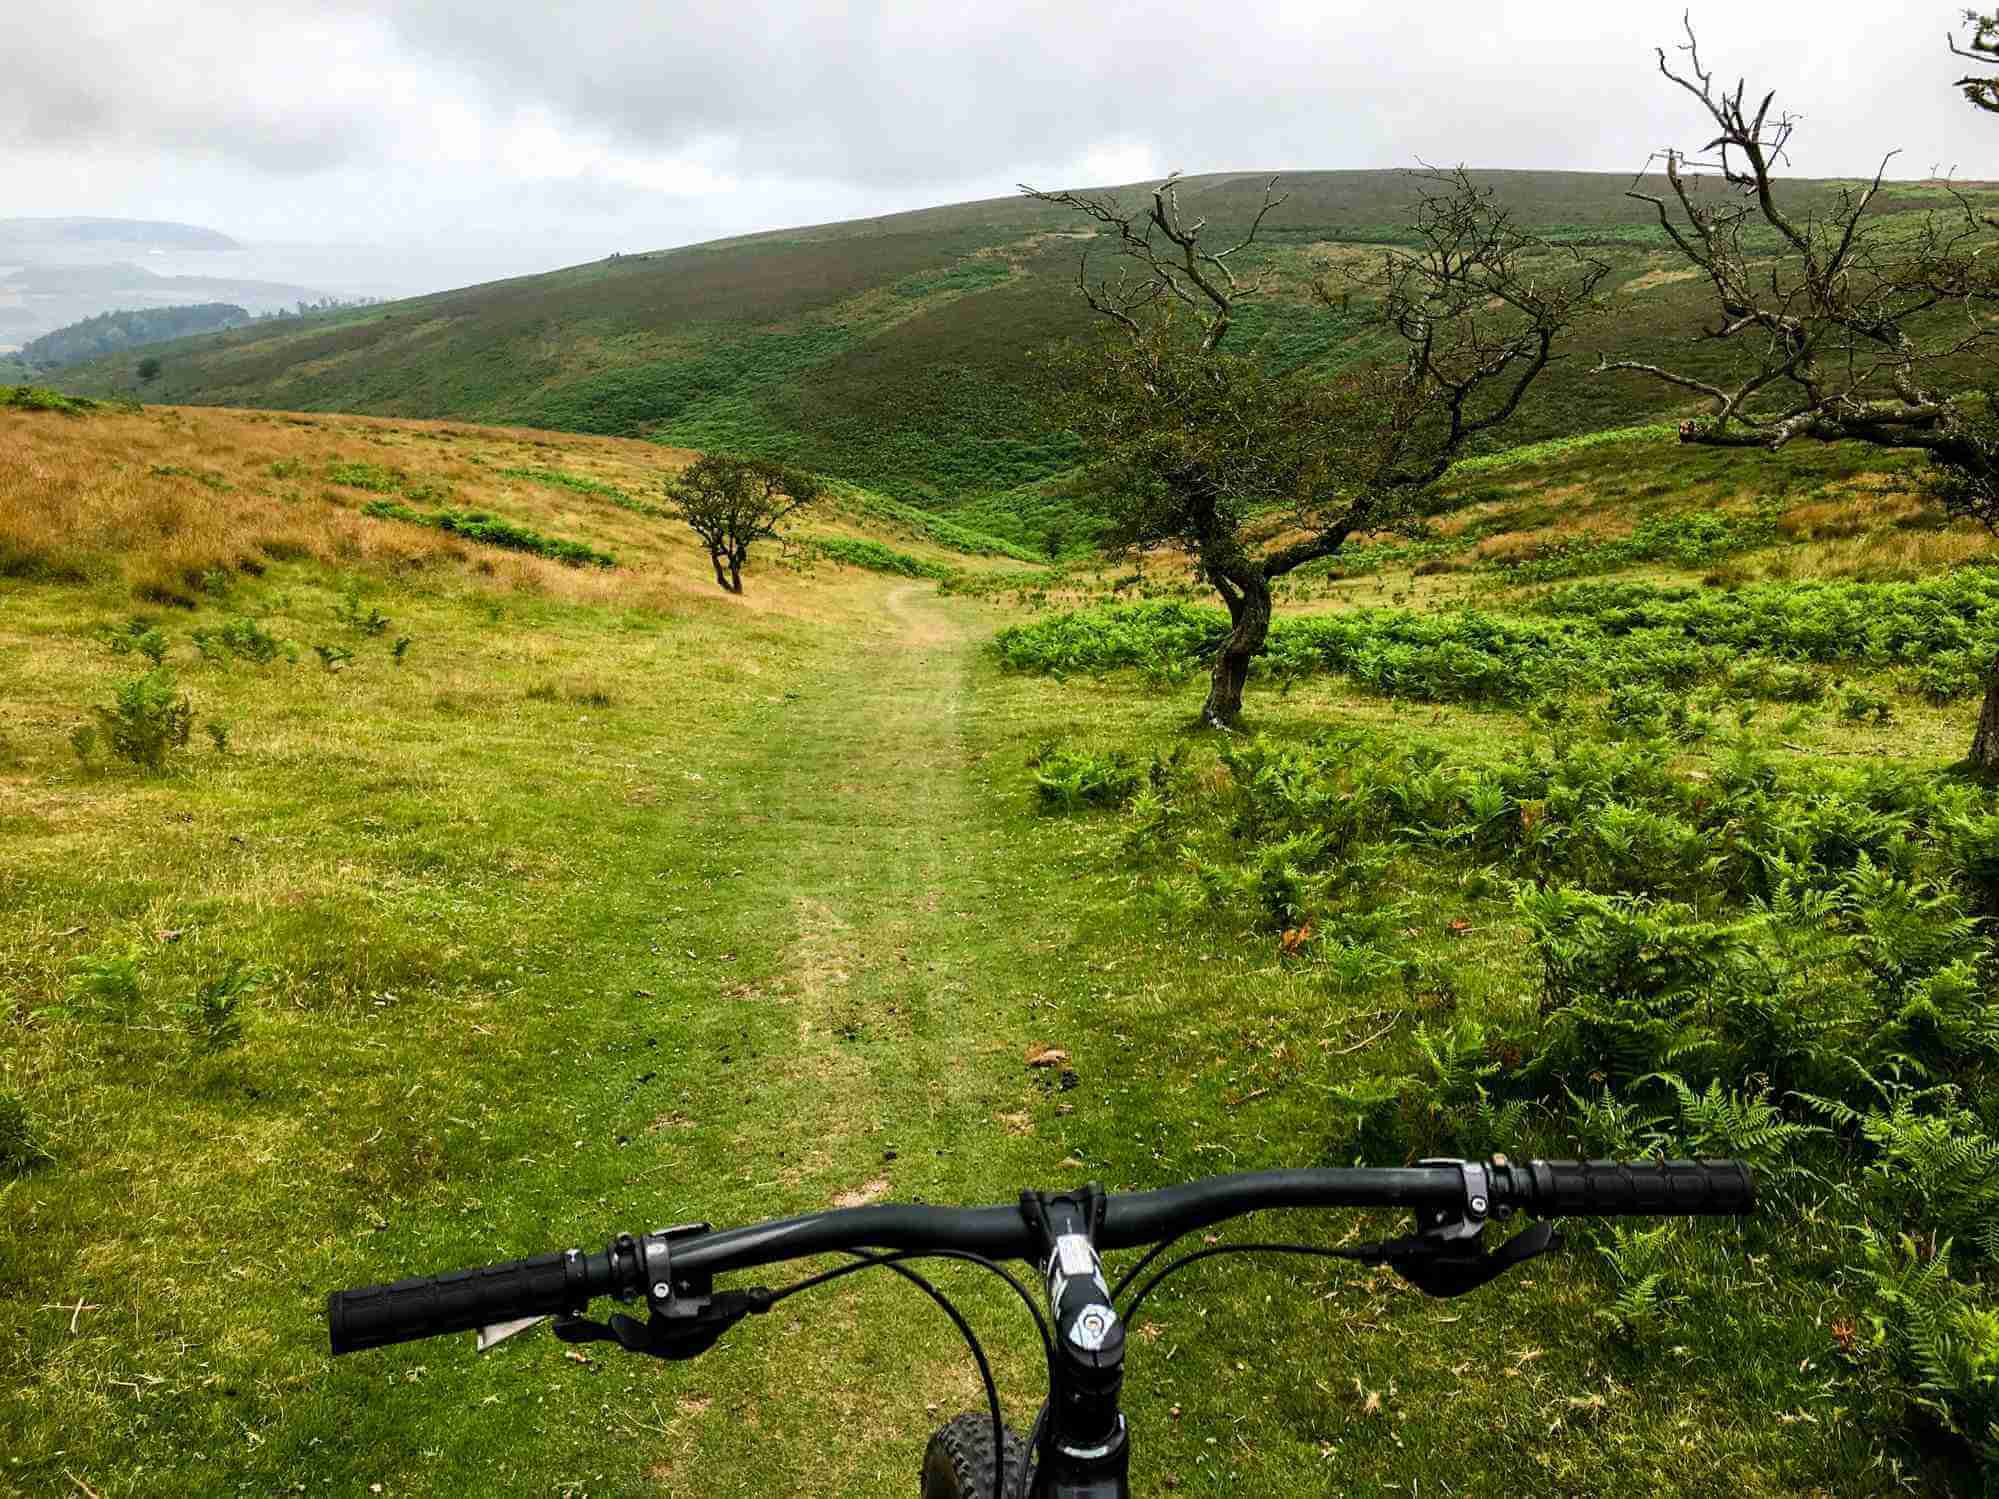 Photo over mountain bike handlebars looking out over grassy singletrack trail in southwest England